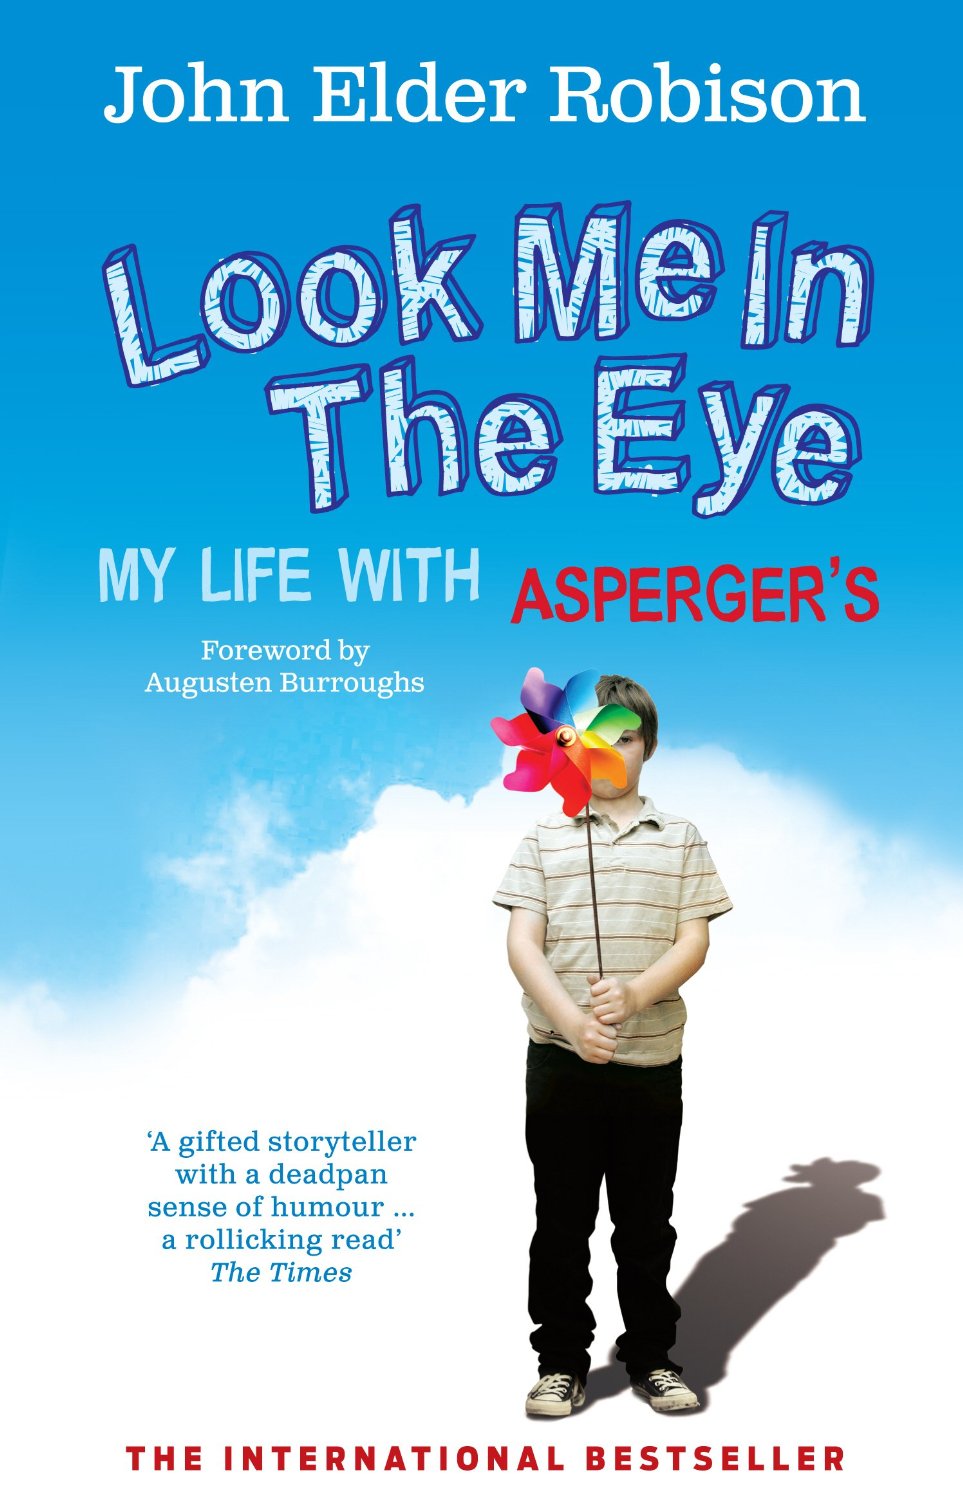 Look Me in the Eye. My Life with Aspergers